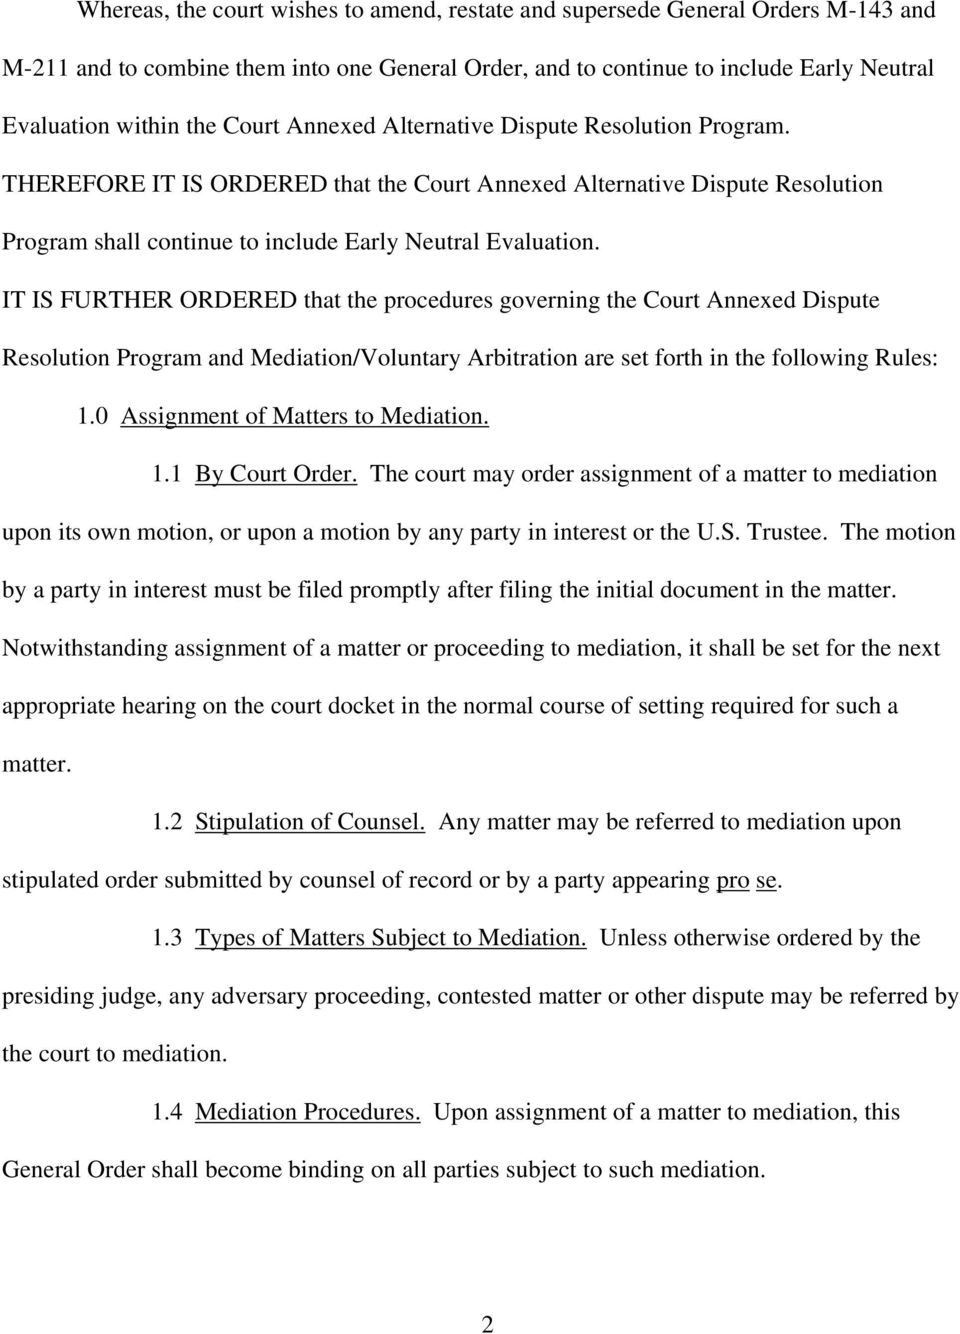 IT IS FURTHER ORDERED that the procedures governing the Court Annexed Dispute Resolution Program and Mediation/Voluntary Arbitration are set forth in the following Rules: 1.